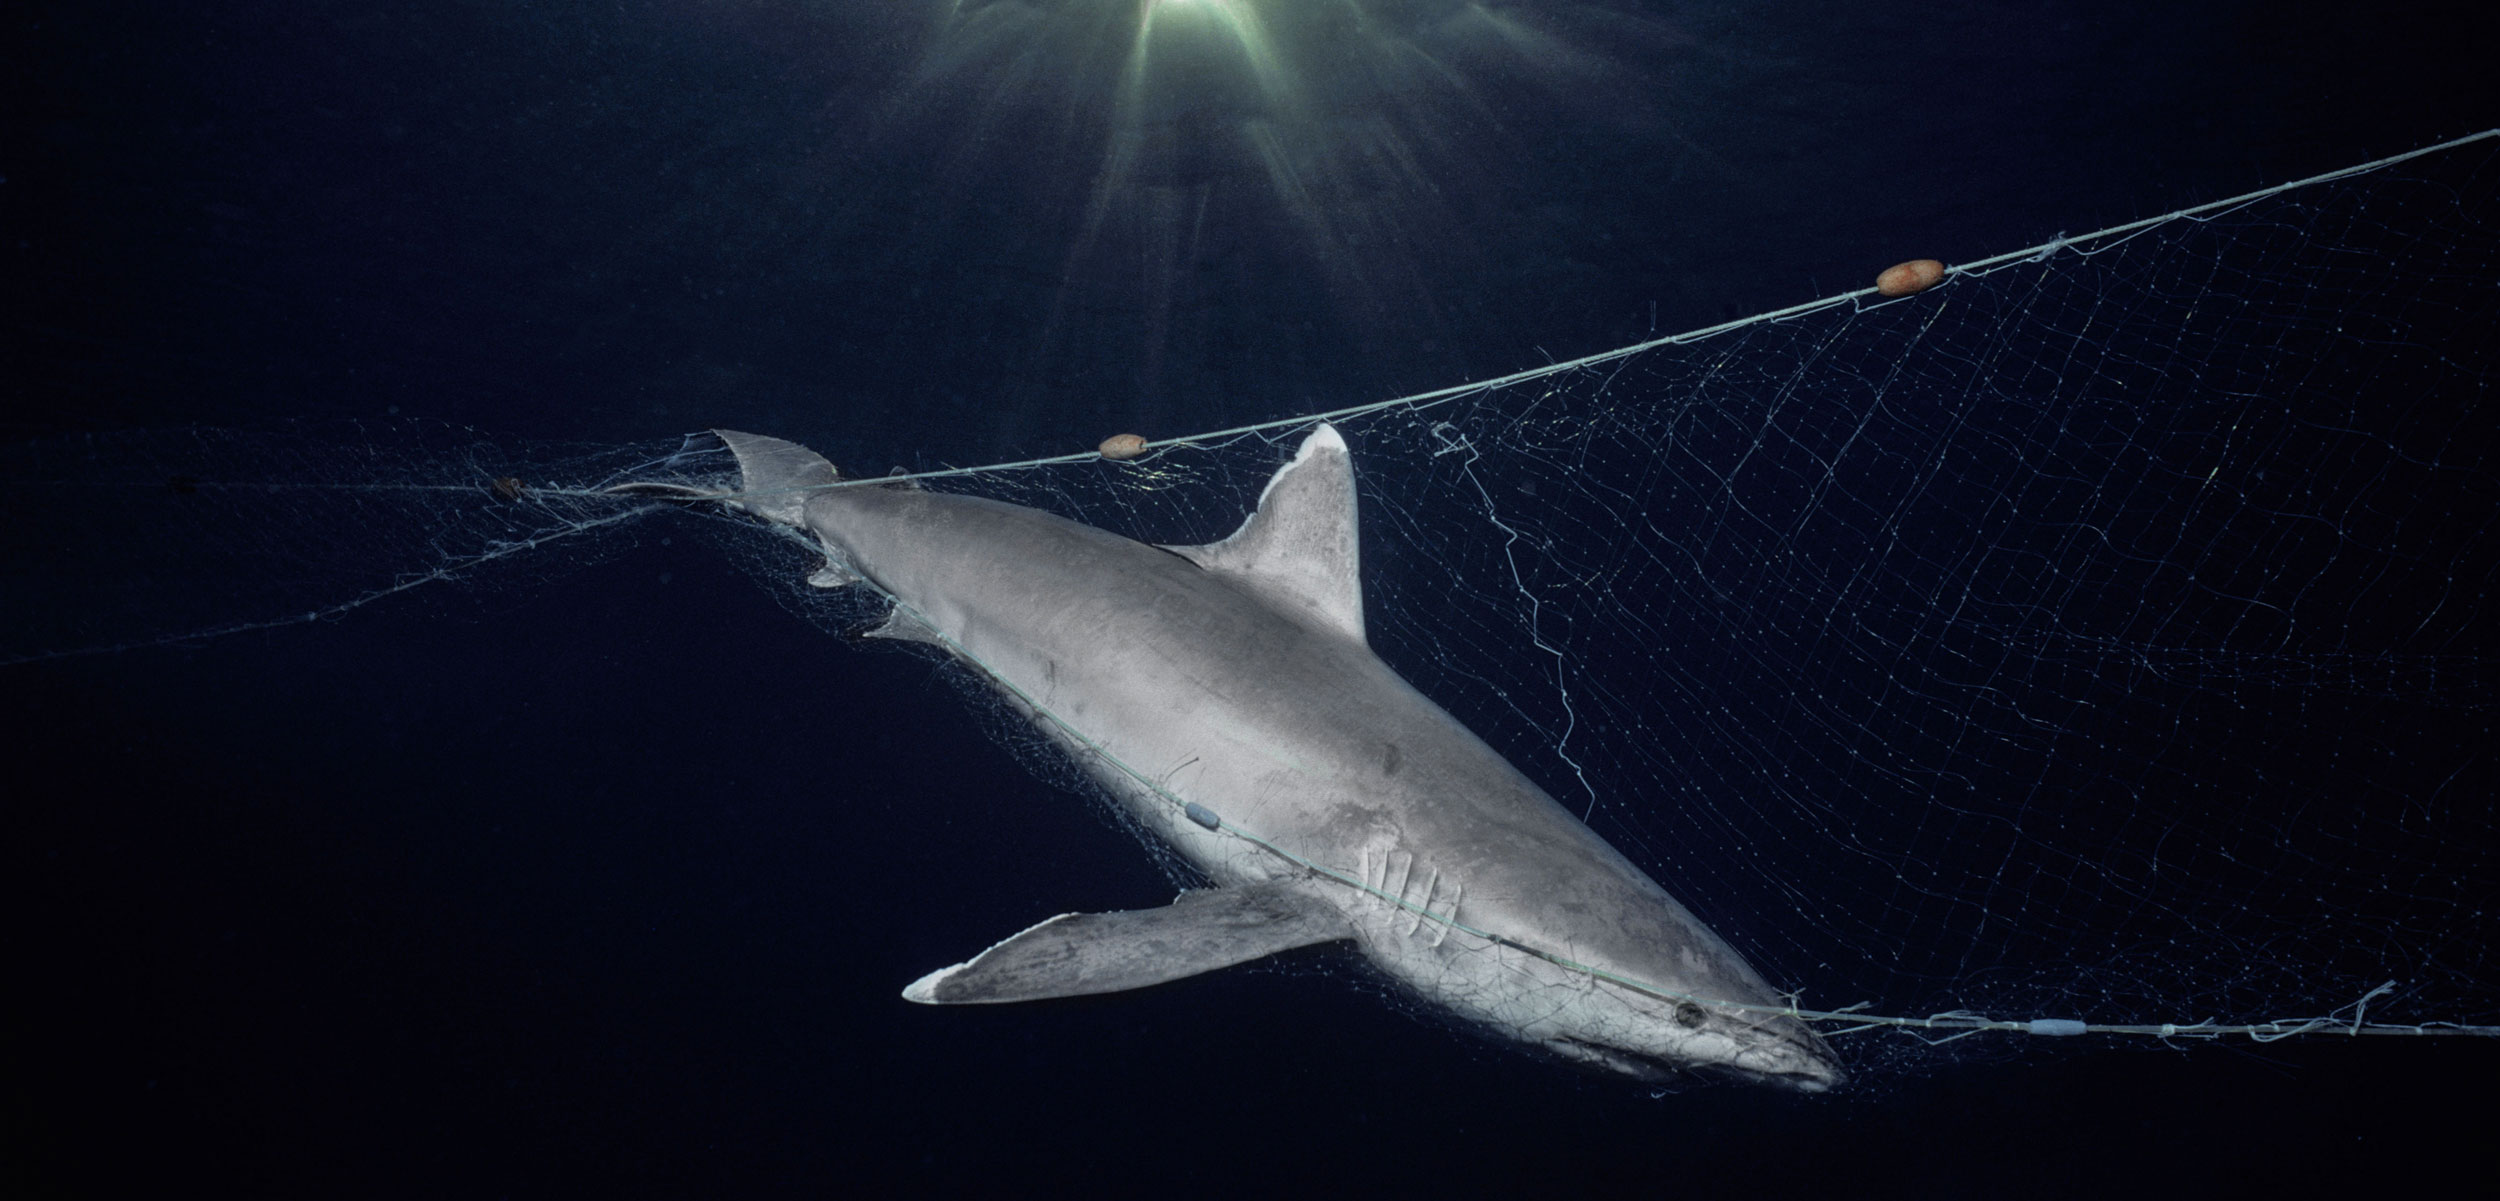 Dead Whitetip Reef Shark (Trianodon obesus) hanging in commercial fishing net